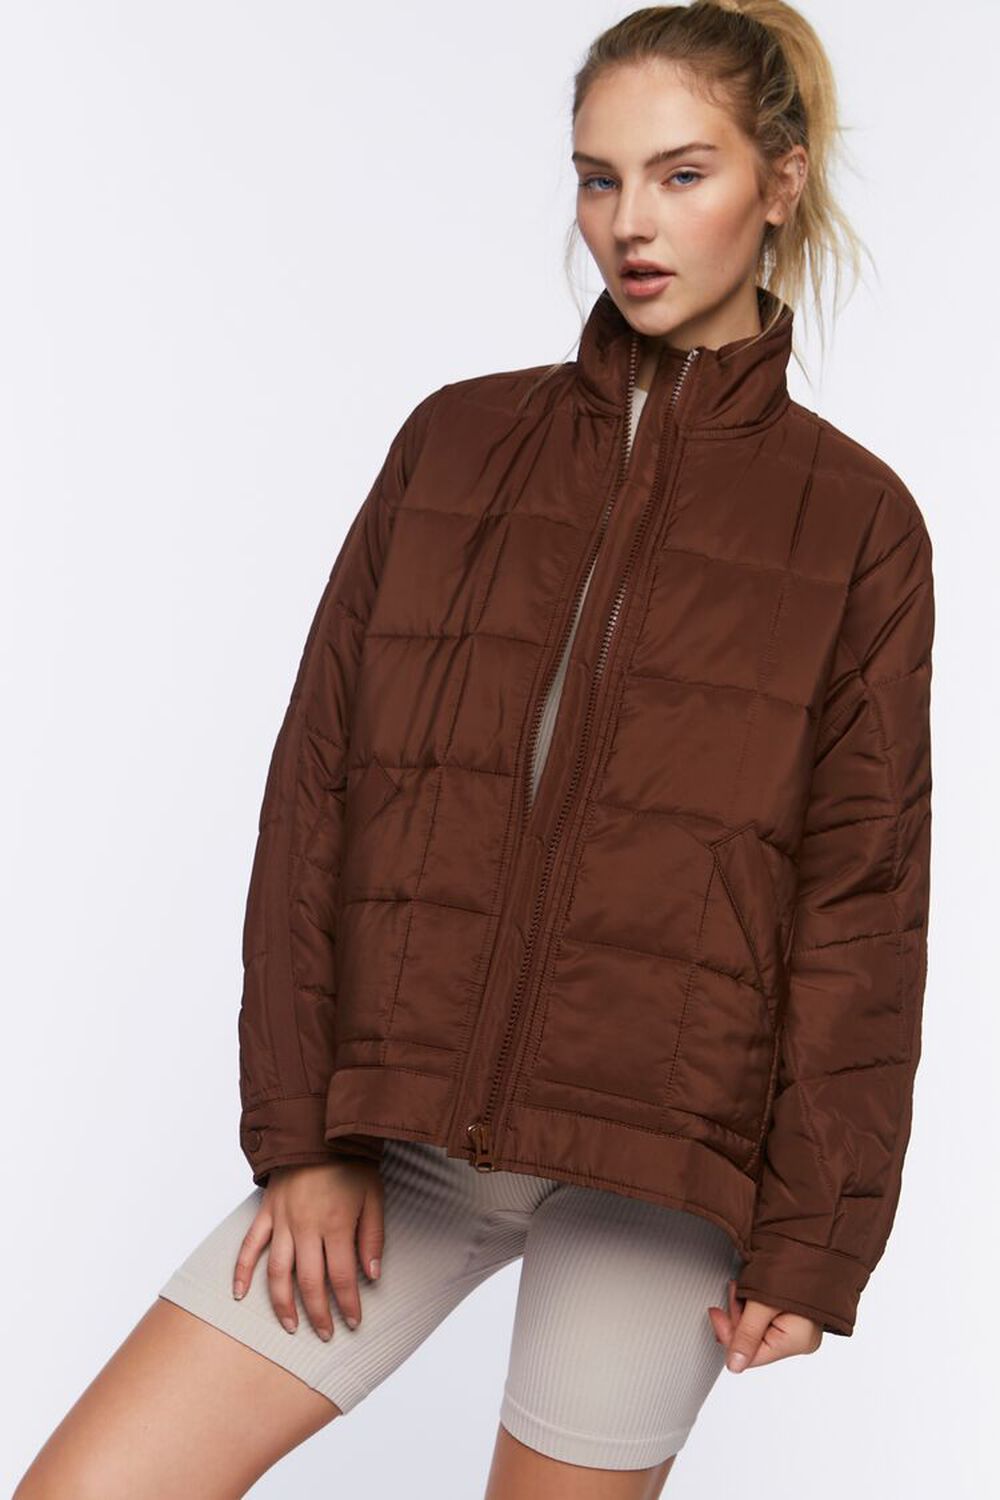 TURKISH COFFEE Active Quilted Puffer Jacket, image 1